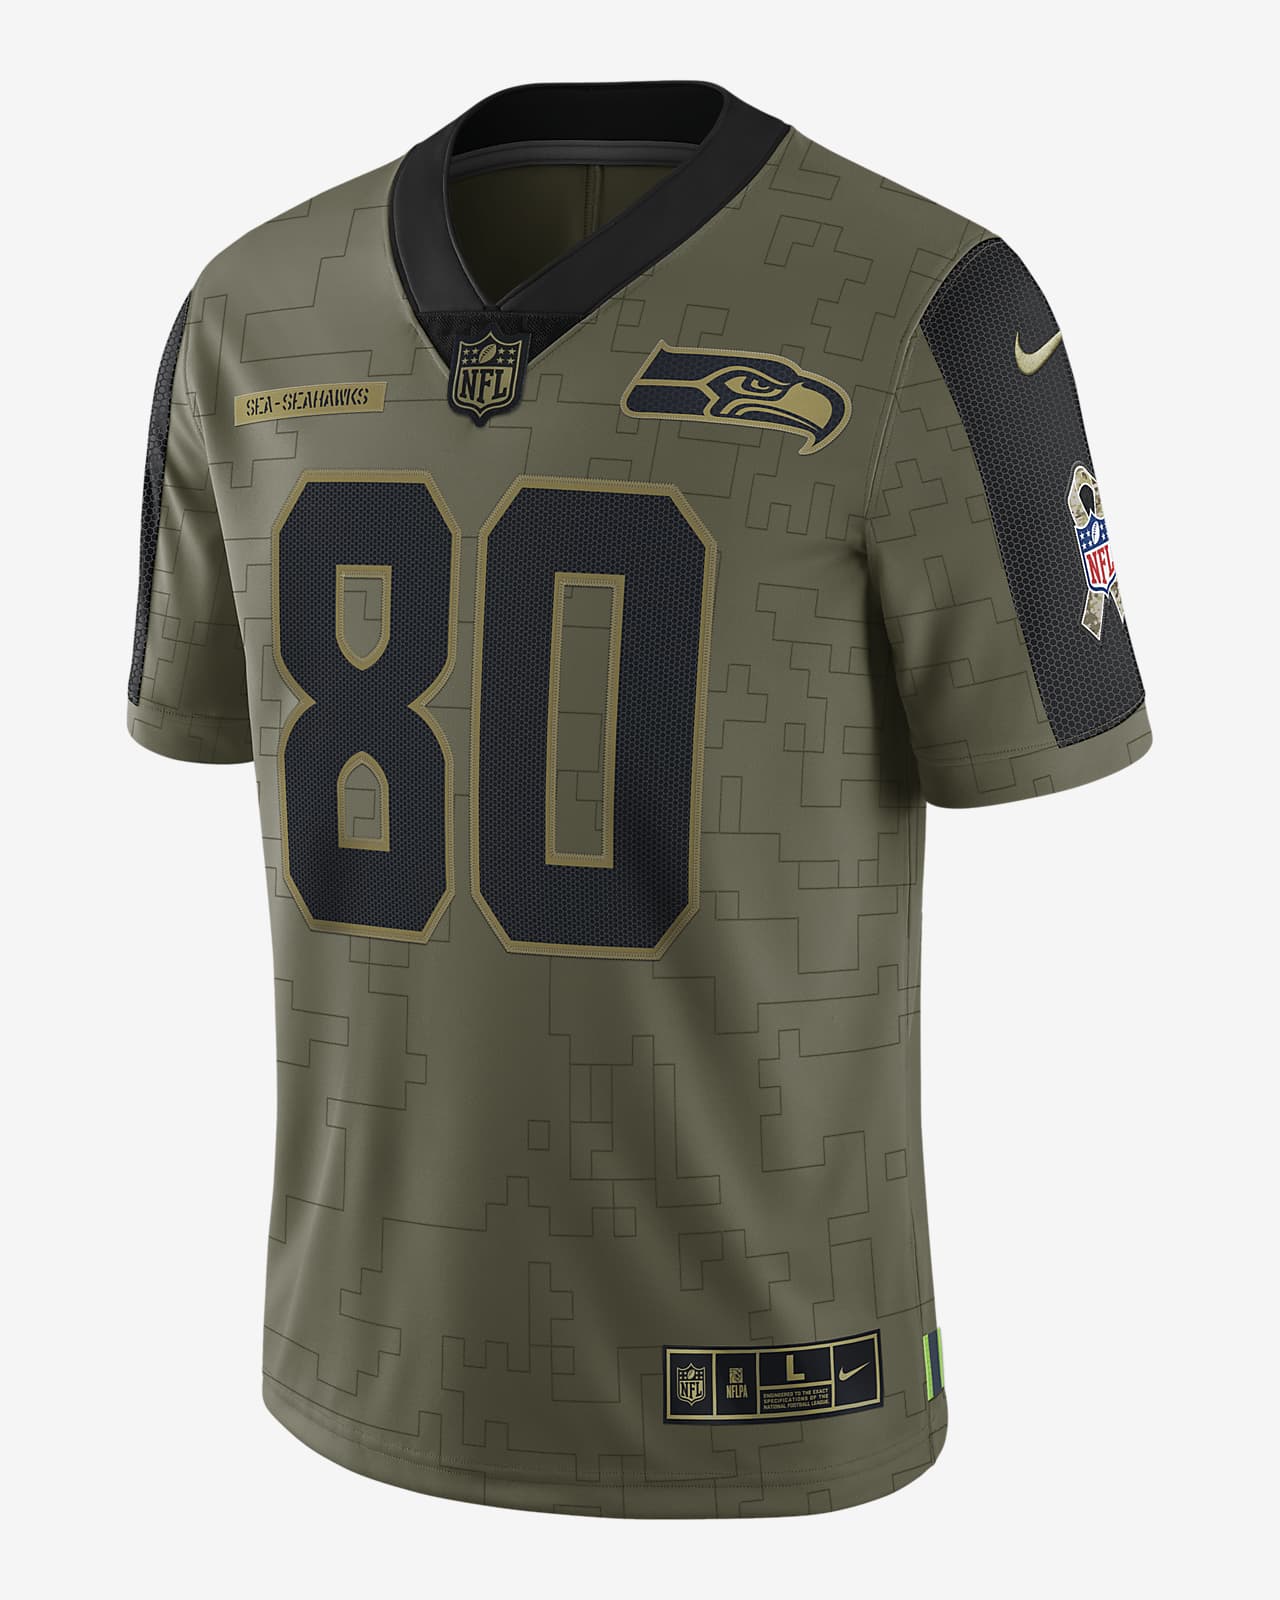 NFL Seattle Seahawks Salute to Service (Steve Largent) Men's Limited Football Jersey